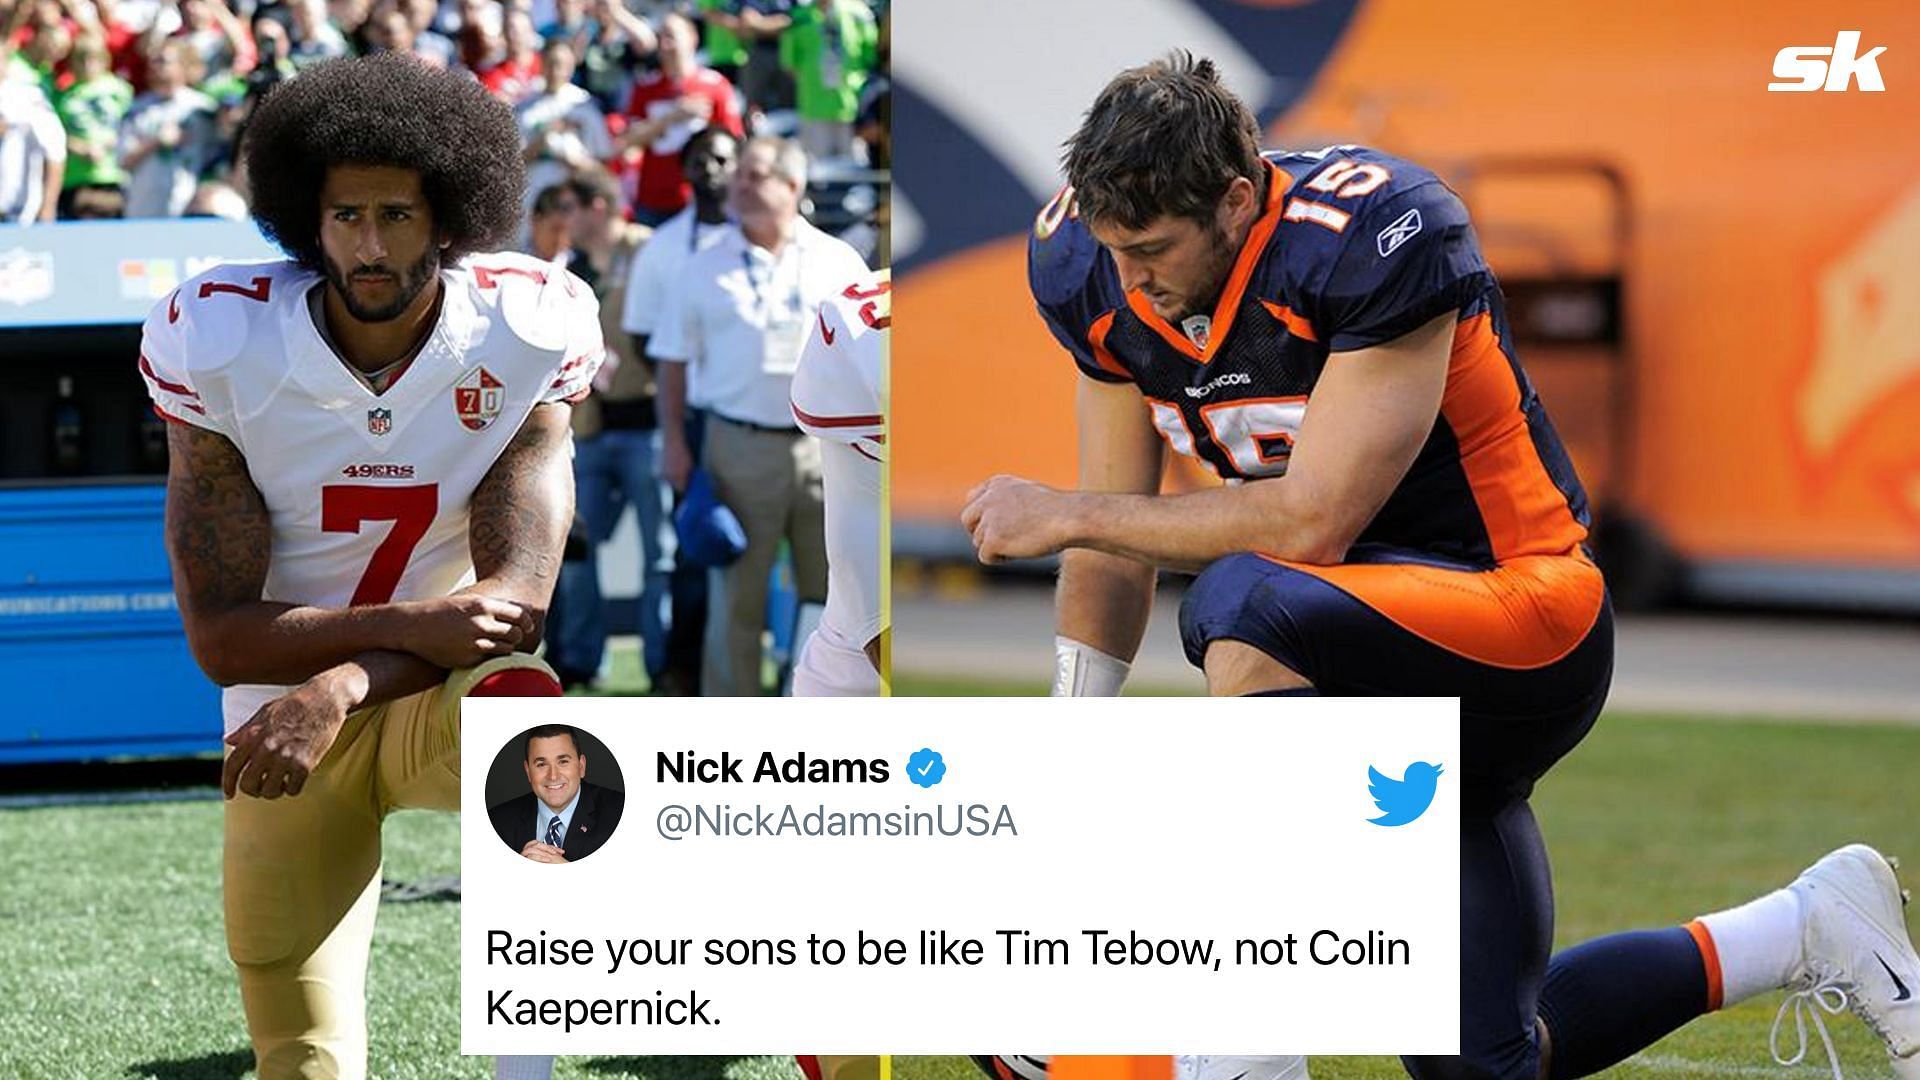 Tim Tebow and Colin Kaepernick are both men with good character